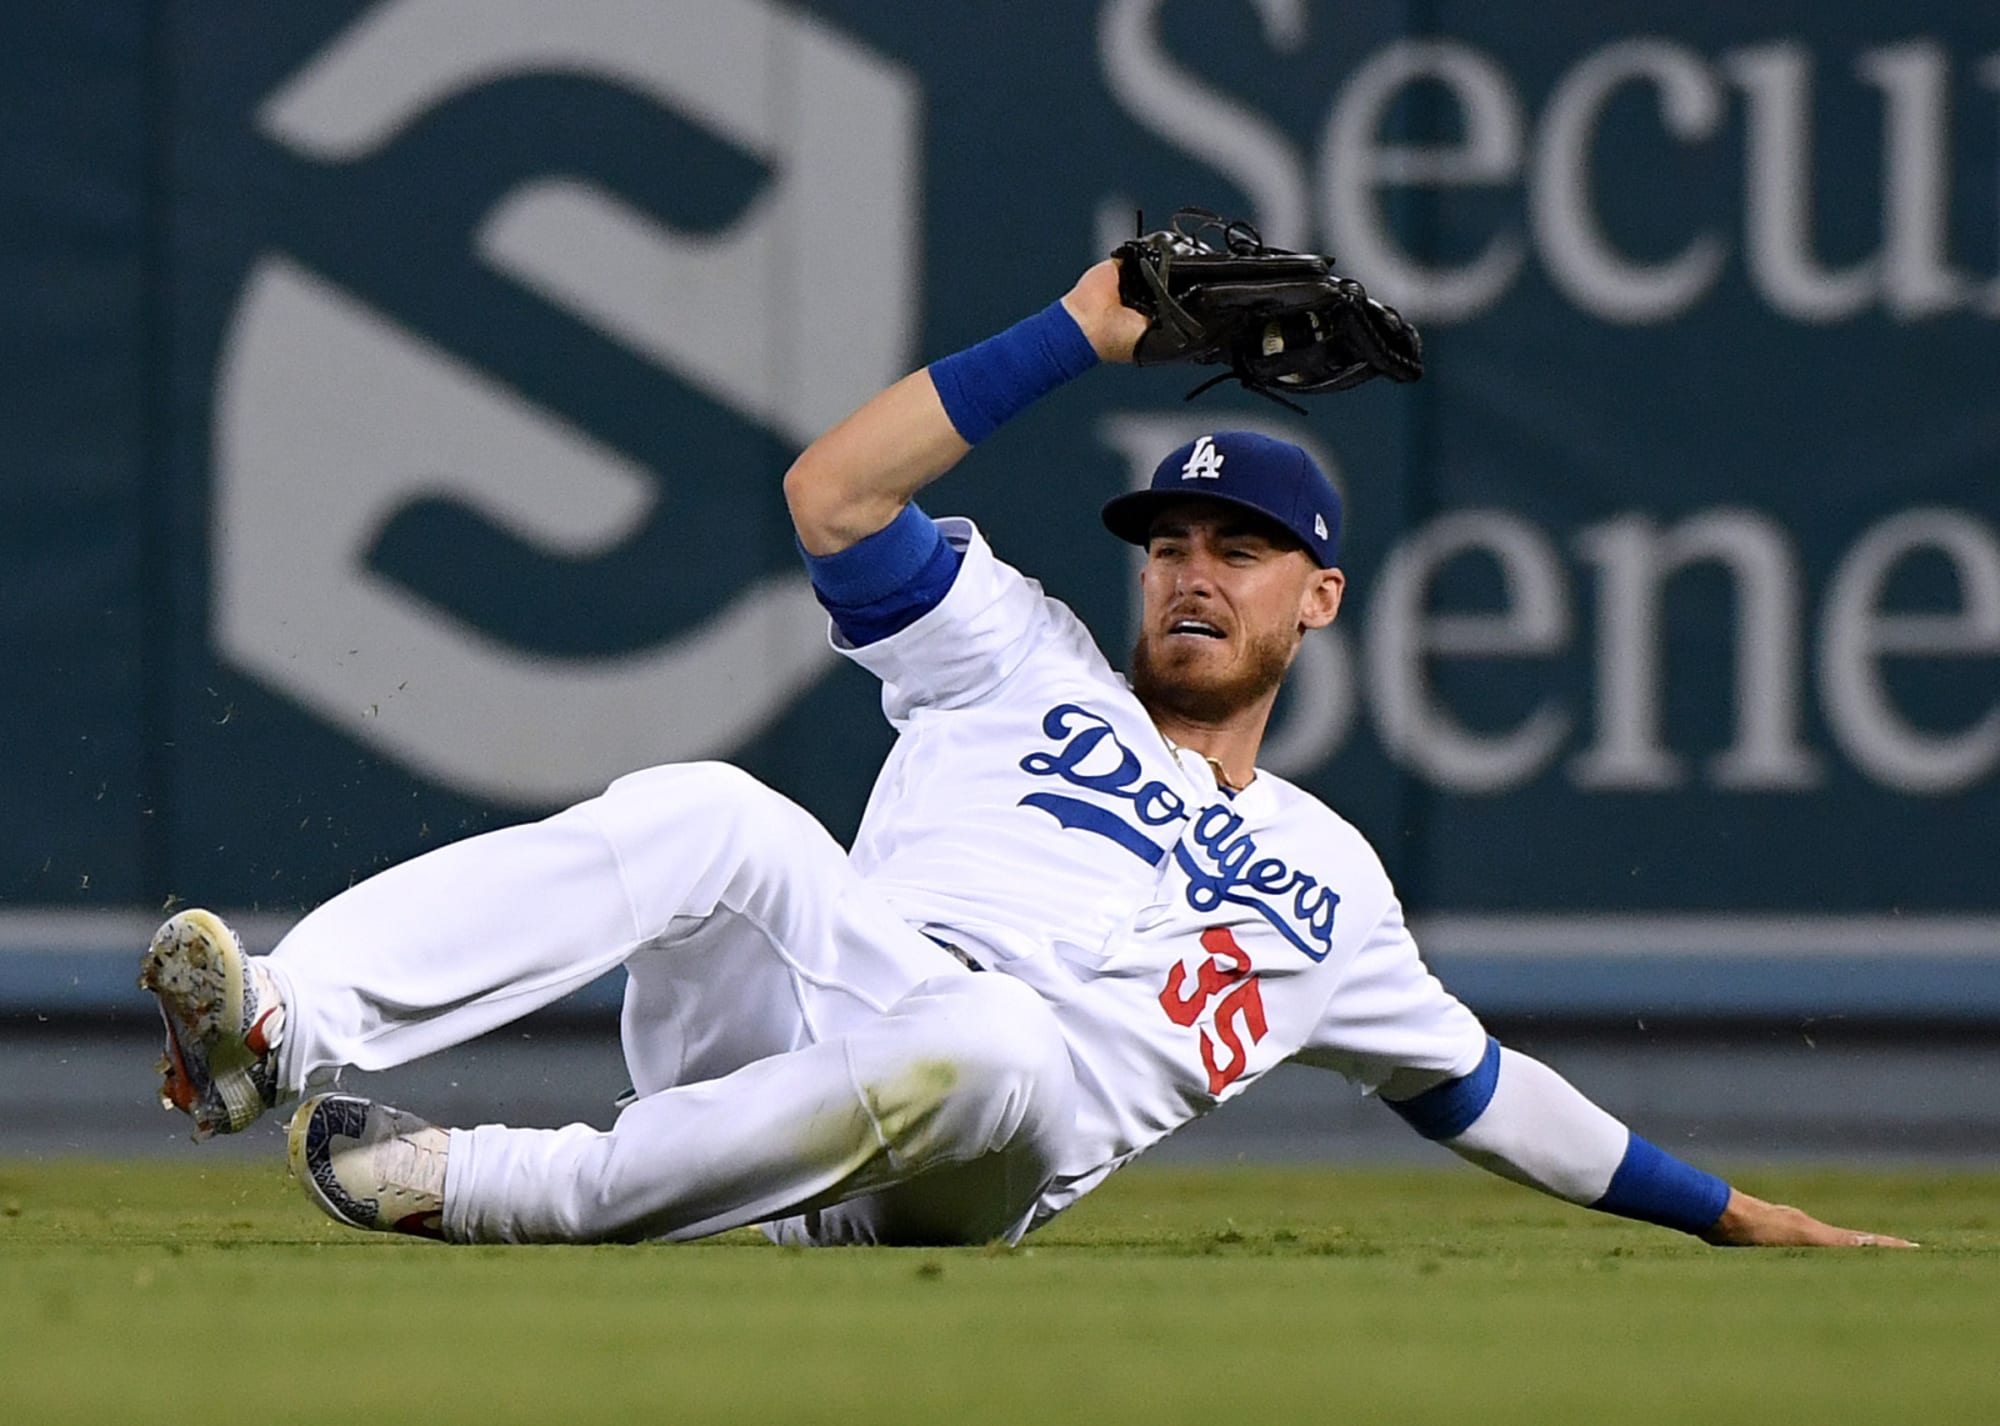 Los Angeles Dodgers look to finish 10-game homestand with 8-2 record